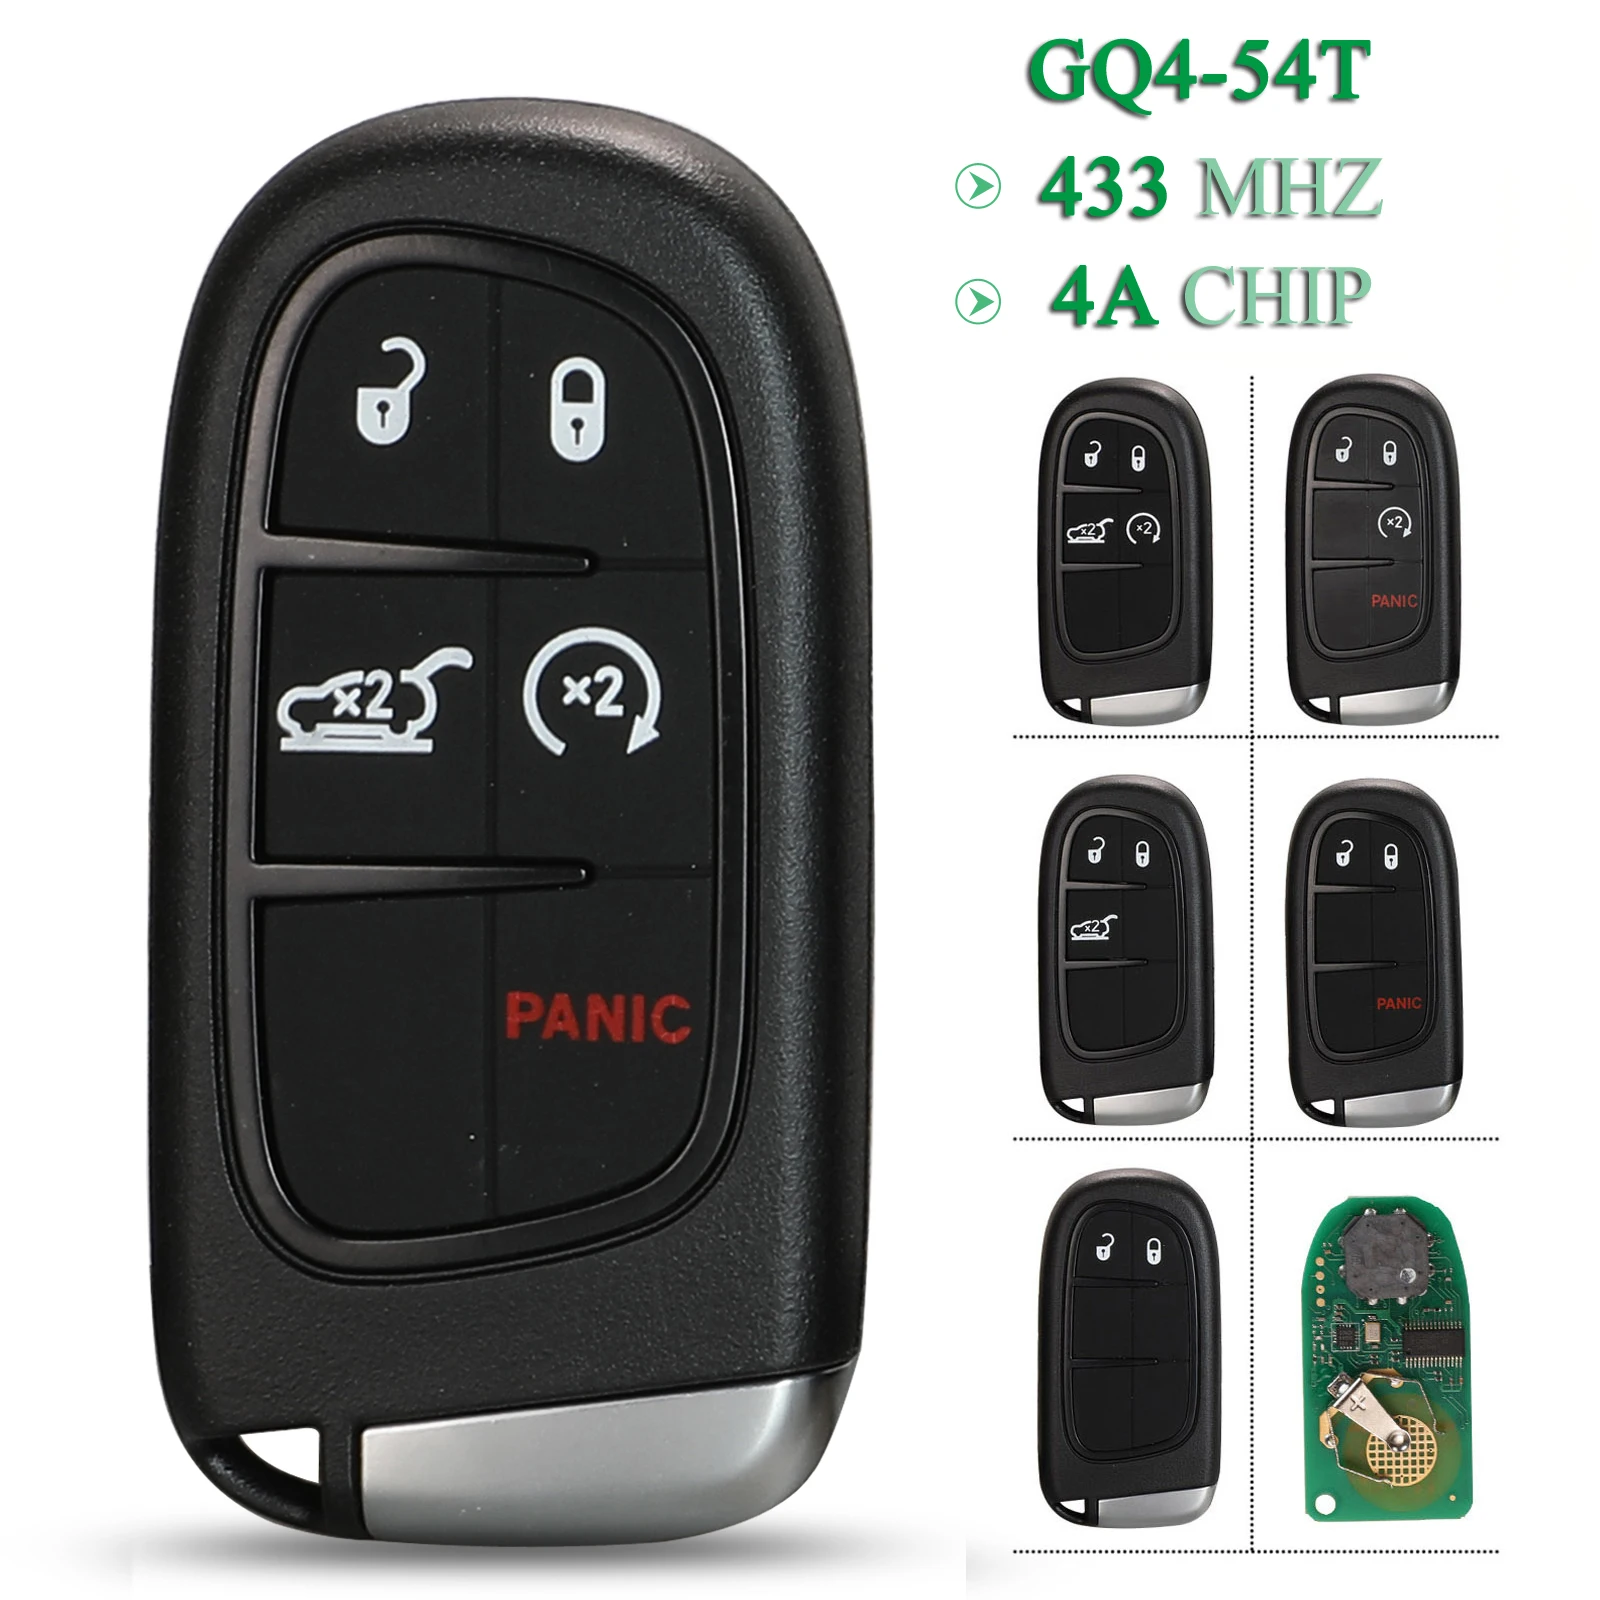 

jingyuqin 2/3/4/5 Buttons 4A PCF7938X Chip 433MHz Hitag-AES Smart Remote Car Key FOB For Jeep Cherokee Durango Chrysler GQ4-54T